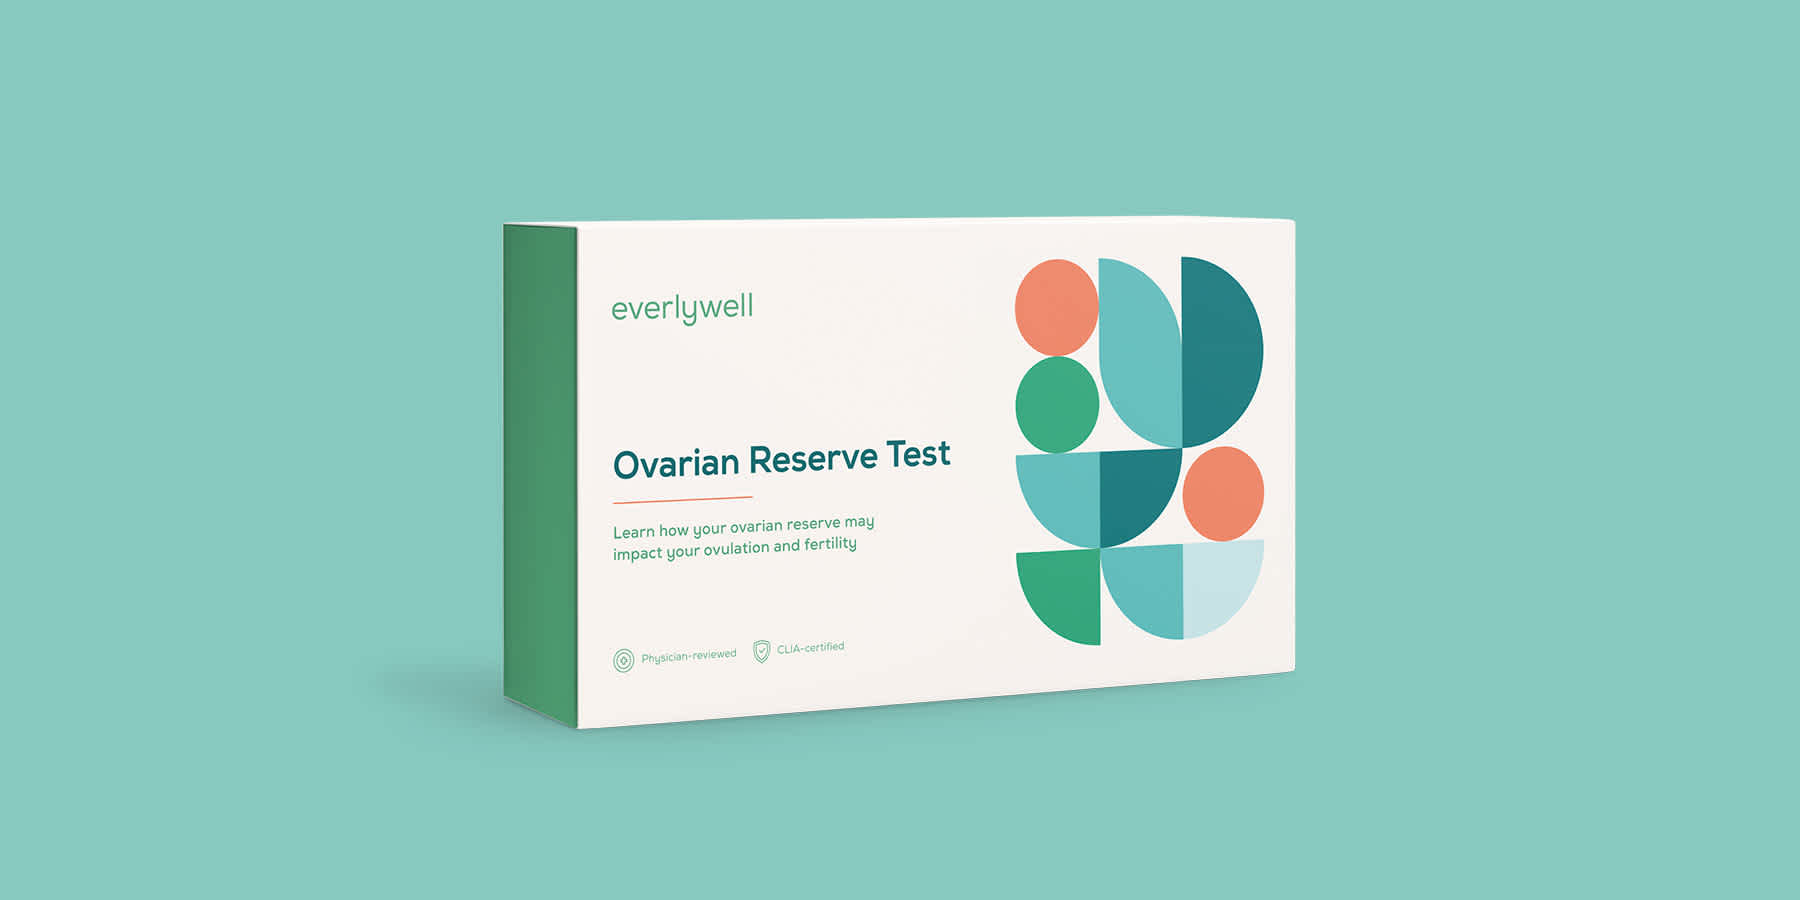 What is a diminished ovarian reserve?